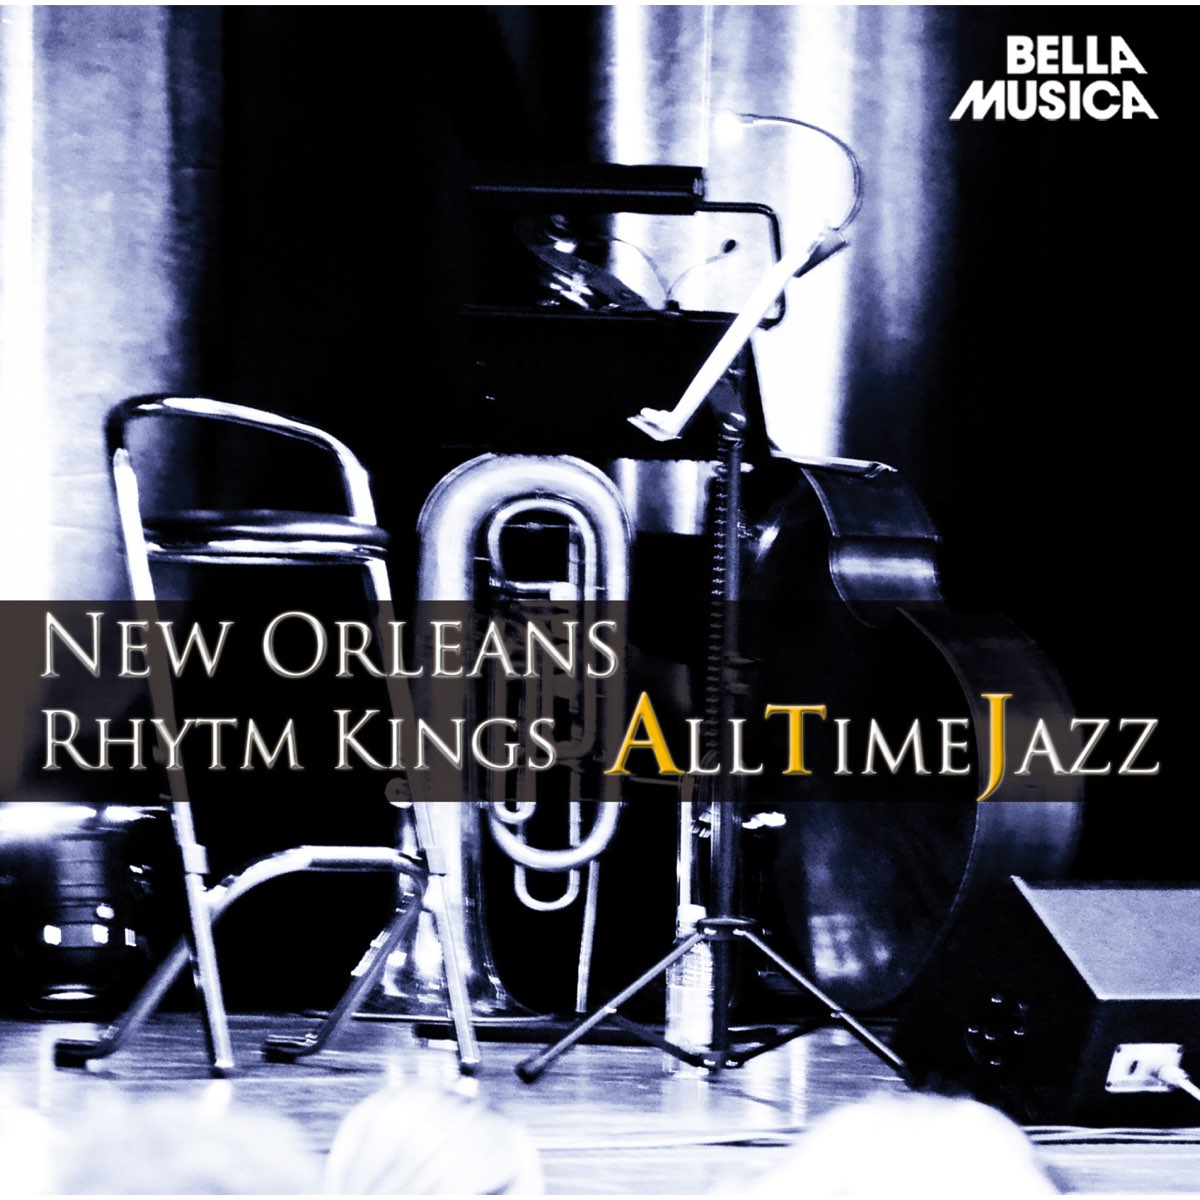 ‎all Time Jazz New Orleans Rhythm Kings By The New Orleans Rhythm Kings On Apple Music 0458